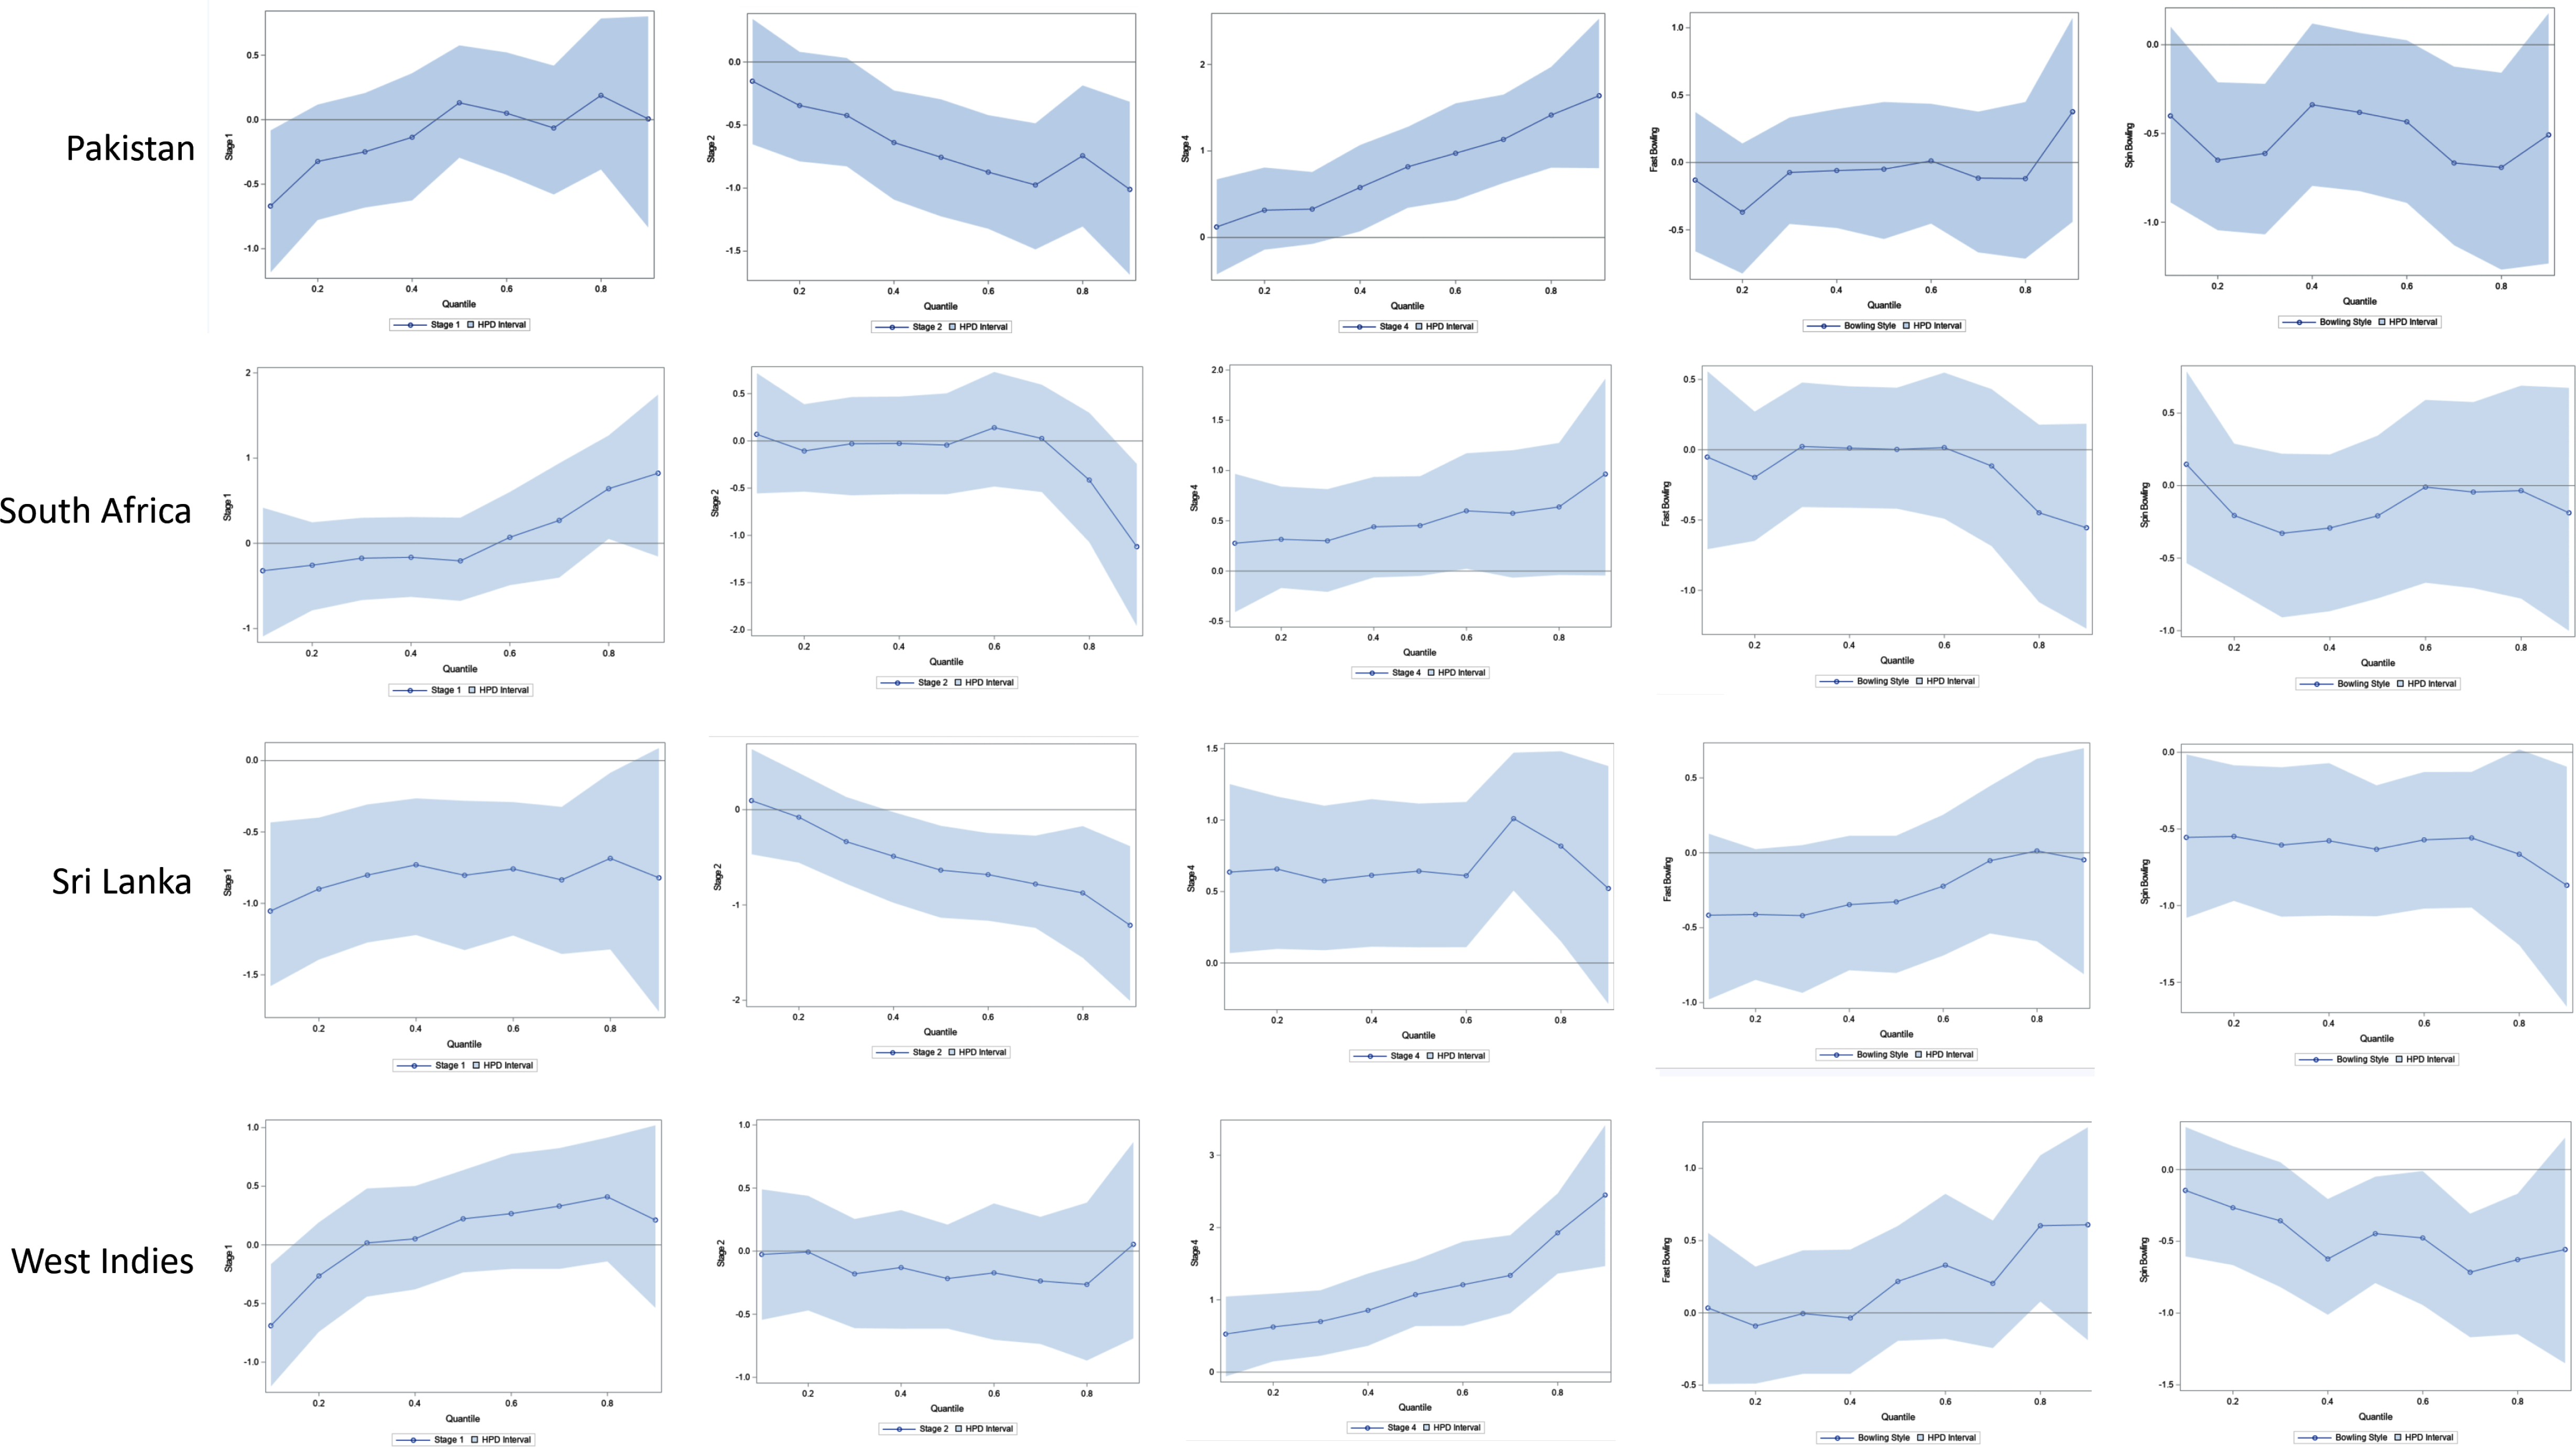 Bayesian Quantile Process Plots for Estimated Parameters with 95% HPD Interval for India, New Zealand, and Pakistan.